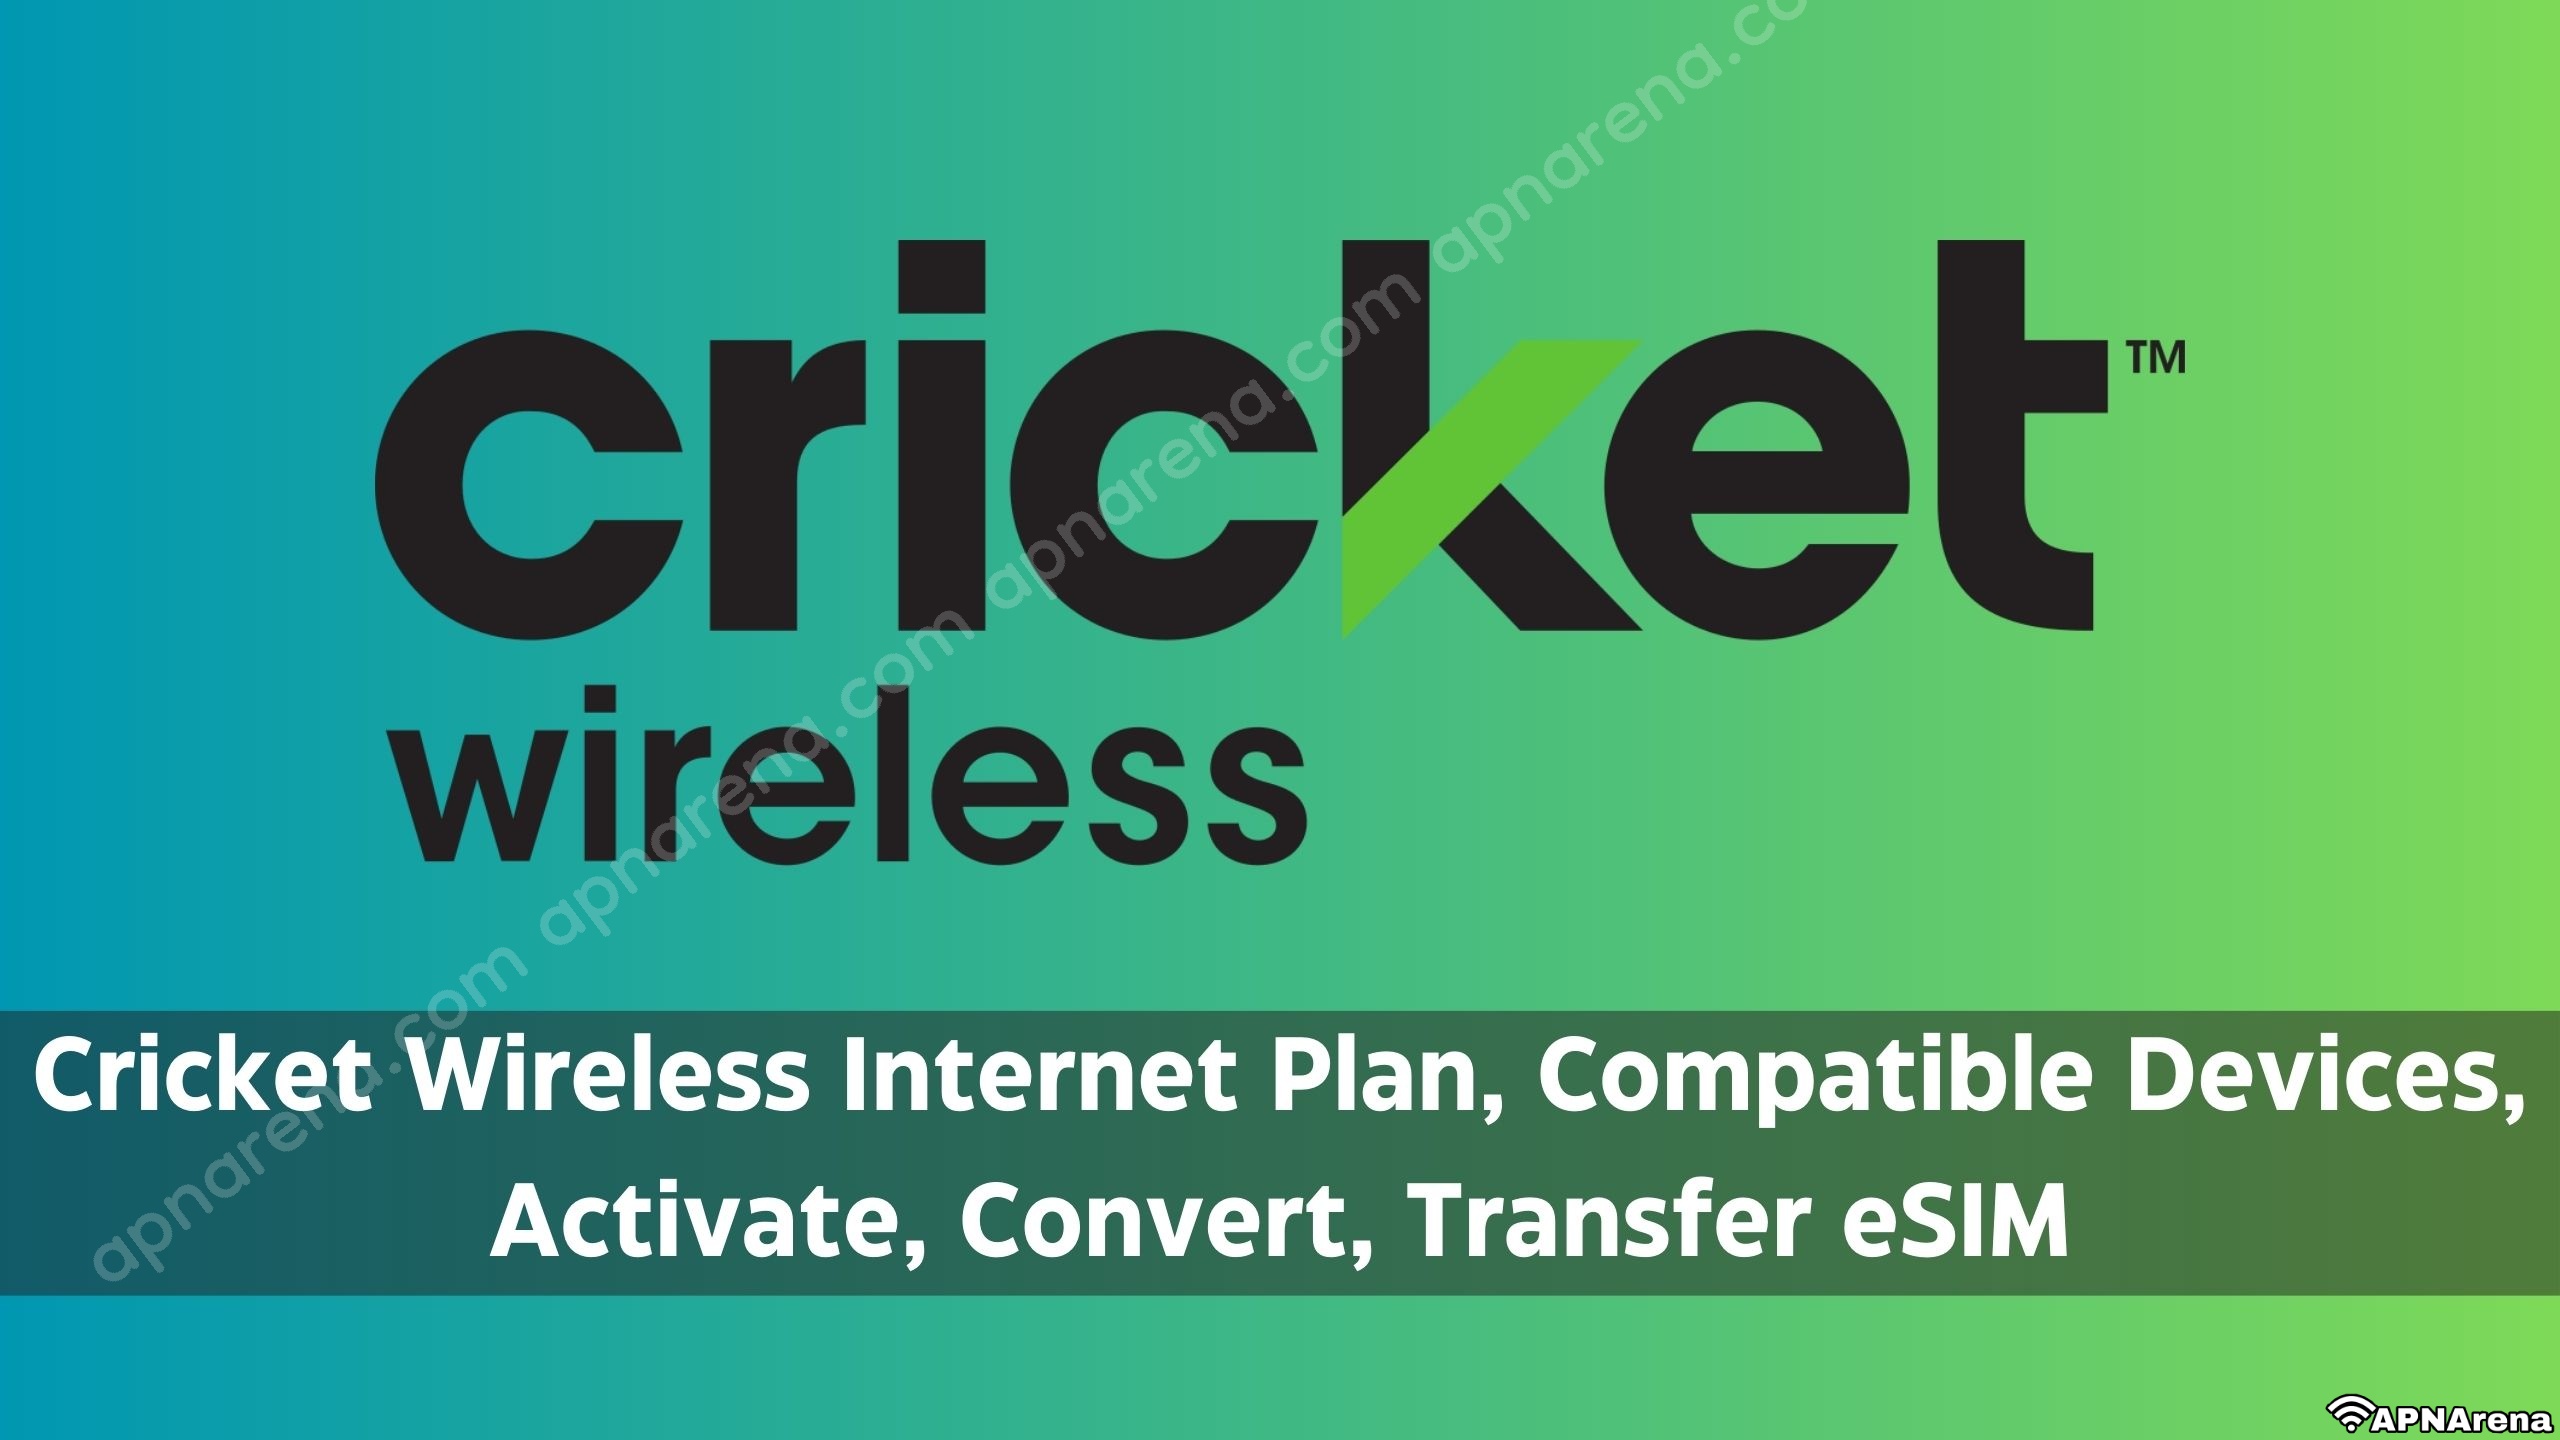 Cricket Wireless prepaid Internet data Plan and Compatible Devices, how to Activate, Convert Wireless, Transfer eSIM to a New Phone